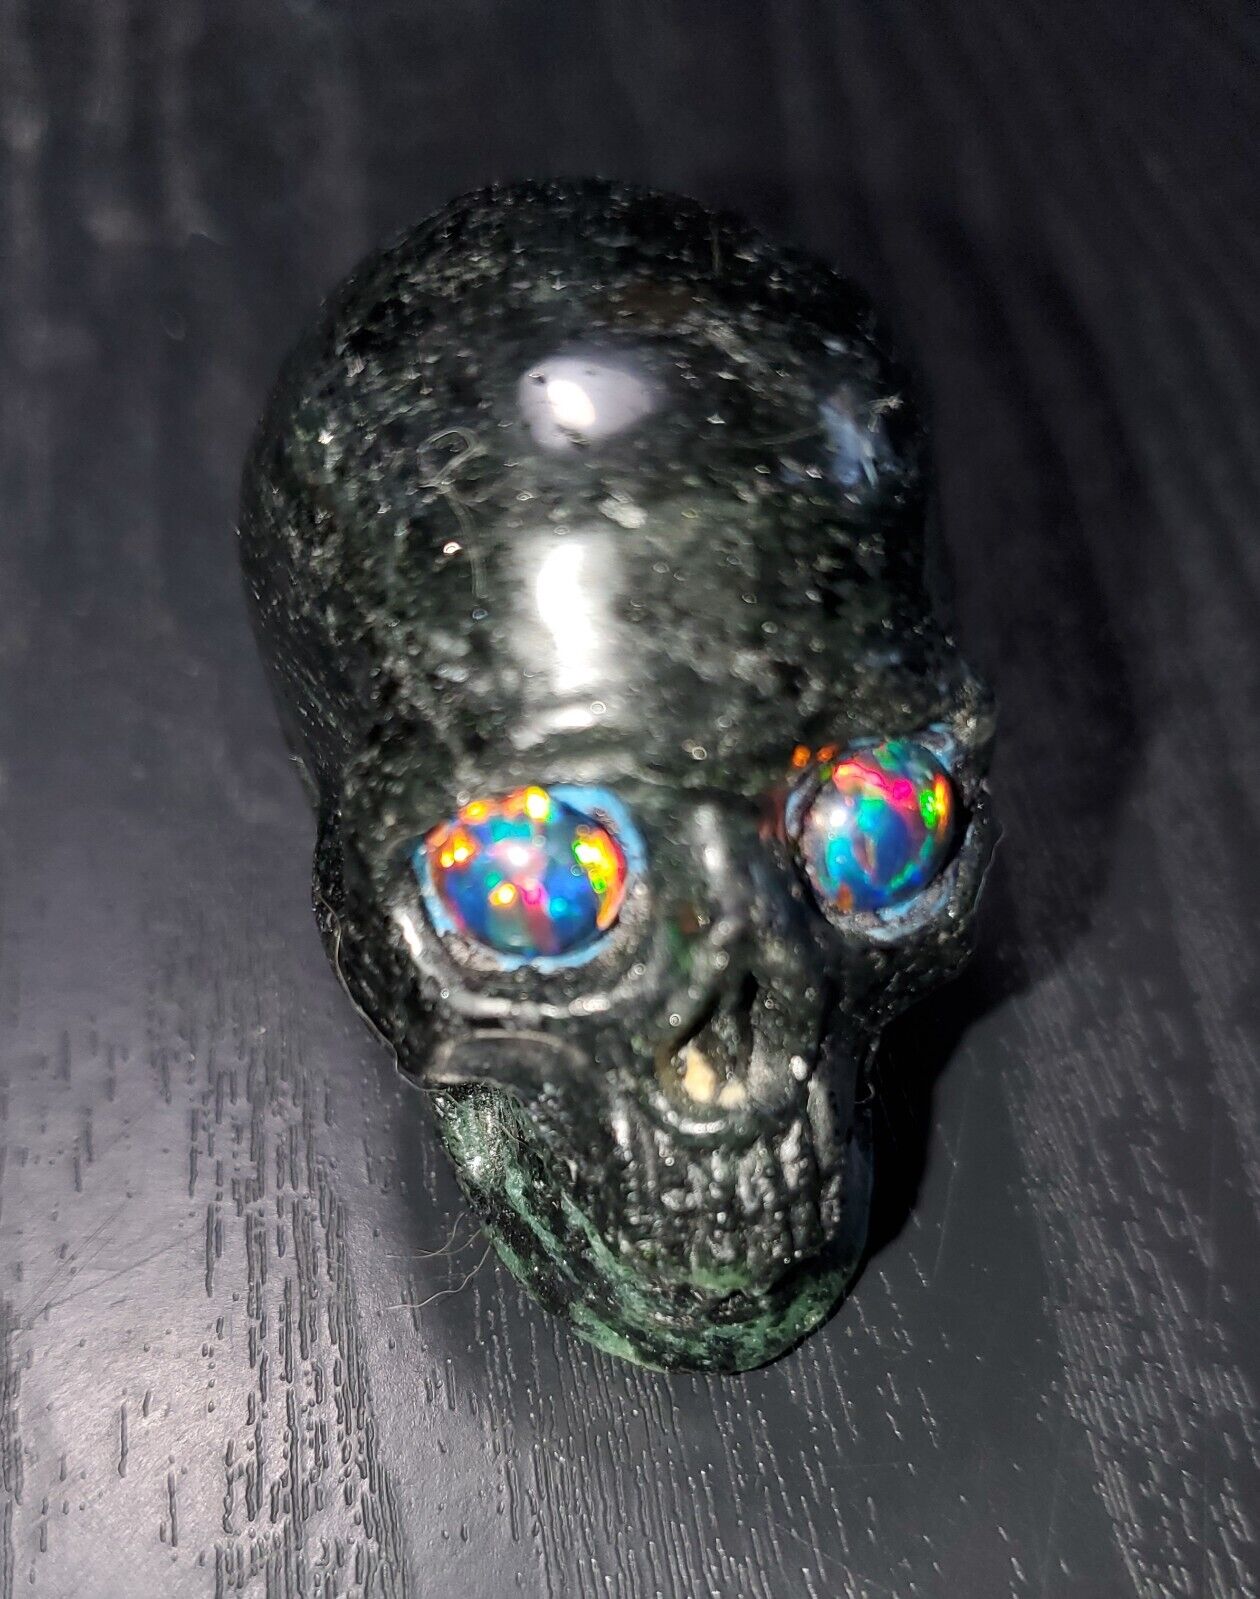 Rubilite Skull with Synthetic Black Opal Eyes